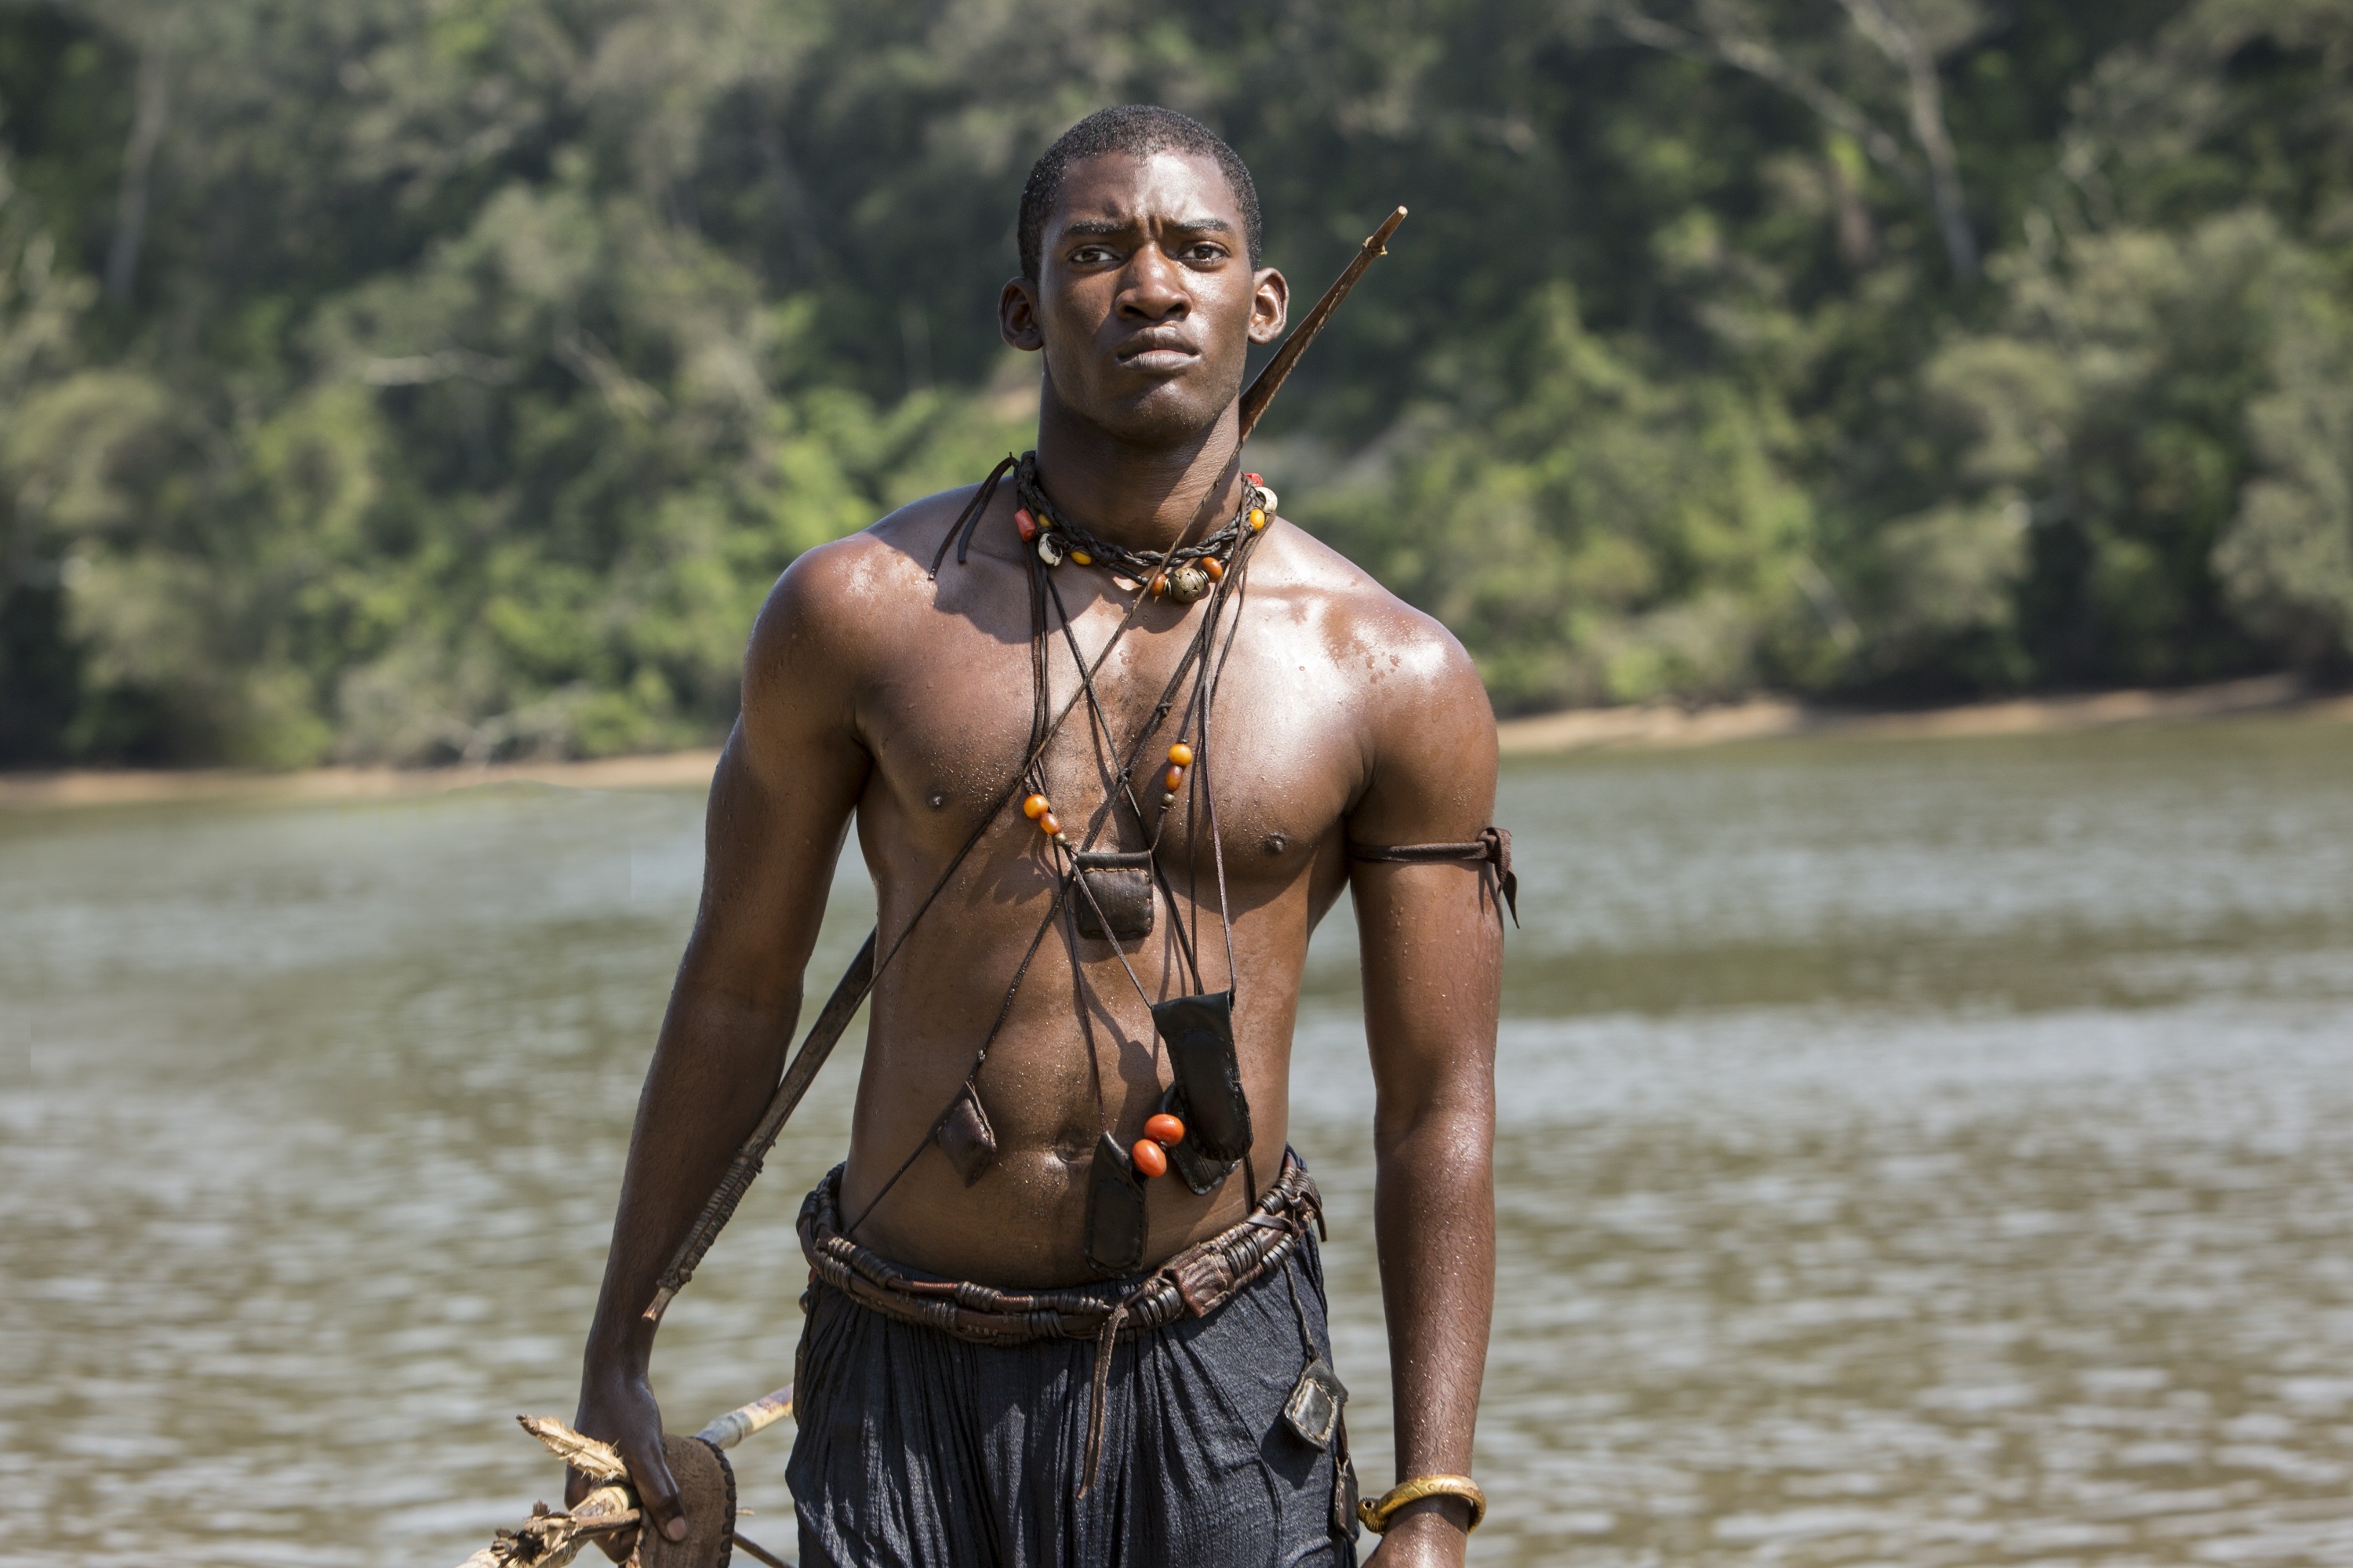 <p>The 2016 miniseries reboot of "Roots" was a powerful look at the legacy of slavery from the moment of capture through the generations of family members that followed. Michael Kirby starred as Kunta Kinte on this History channel semi-biographical journey that was as uplifting as it was heart-wrenching.</p>